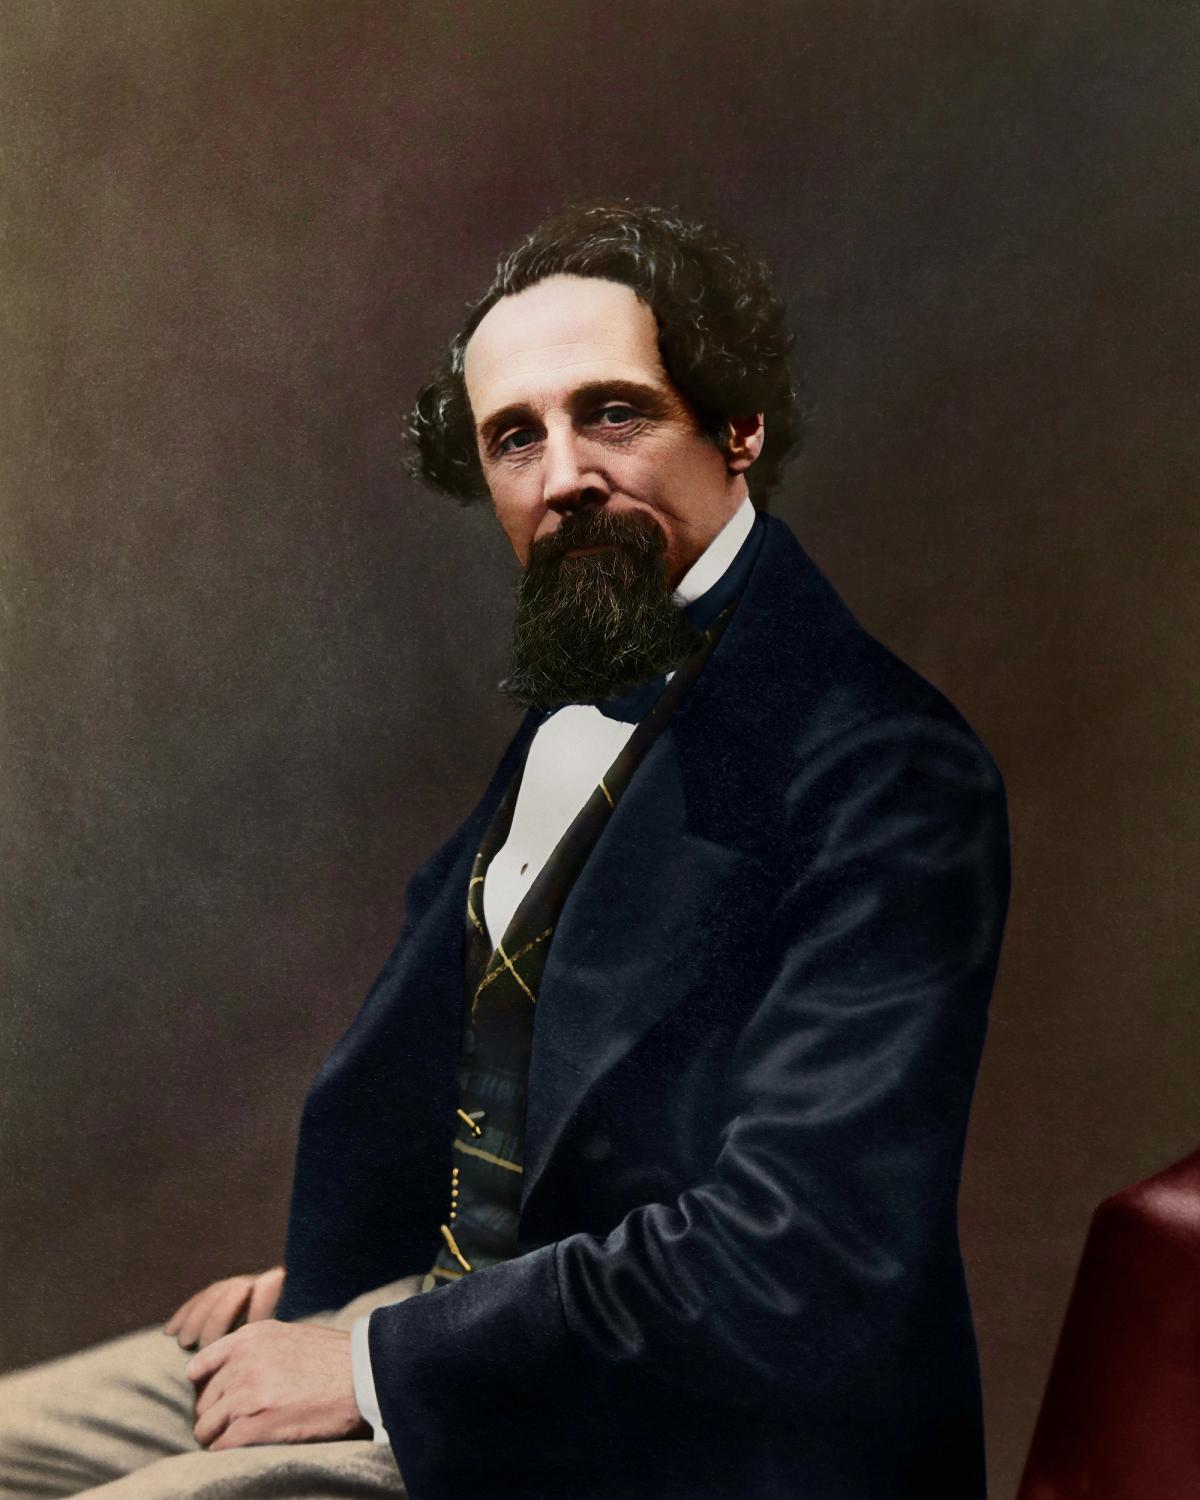 Oliver Clyde’s colourised version of a black-and-white photograph of Charles Dickens taken in 1859 Courtesy Charles Dickens Museum/Oliver Clyde